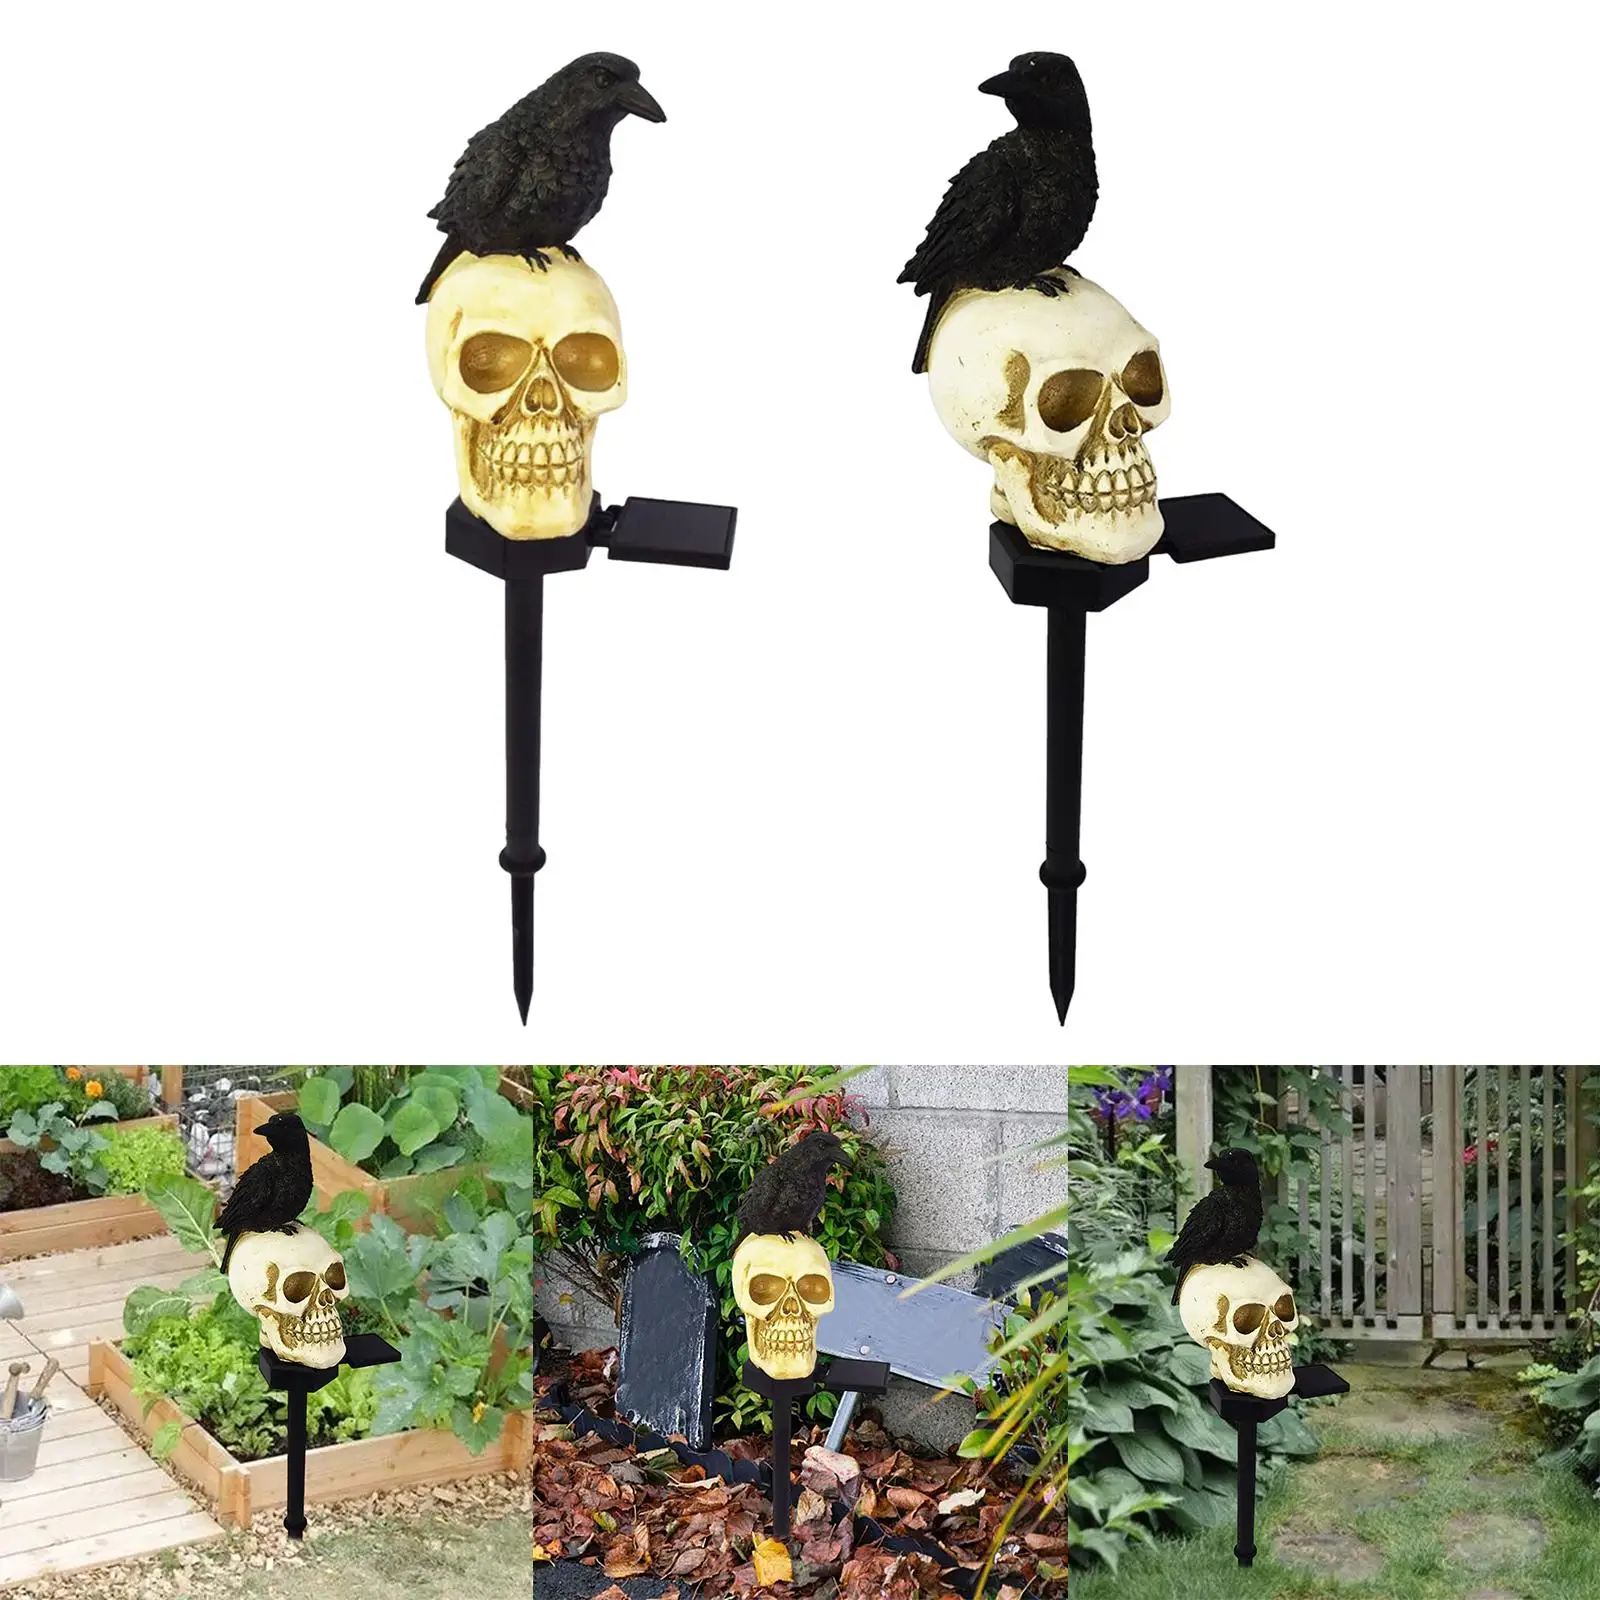 Novelty Garden Light with Stake Waterproof Night Lamp Landscape Lamp Stake Light Path Lighting for Lawn Halloween Pathway Patio